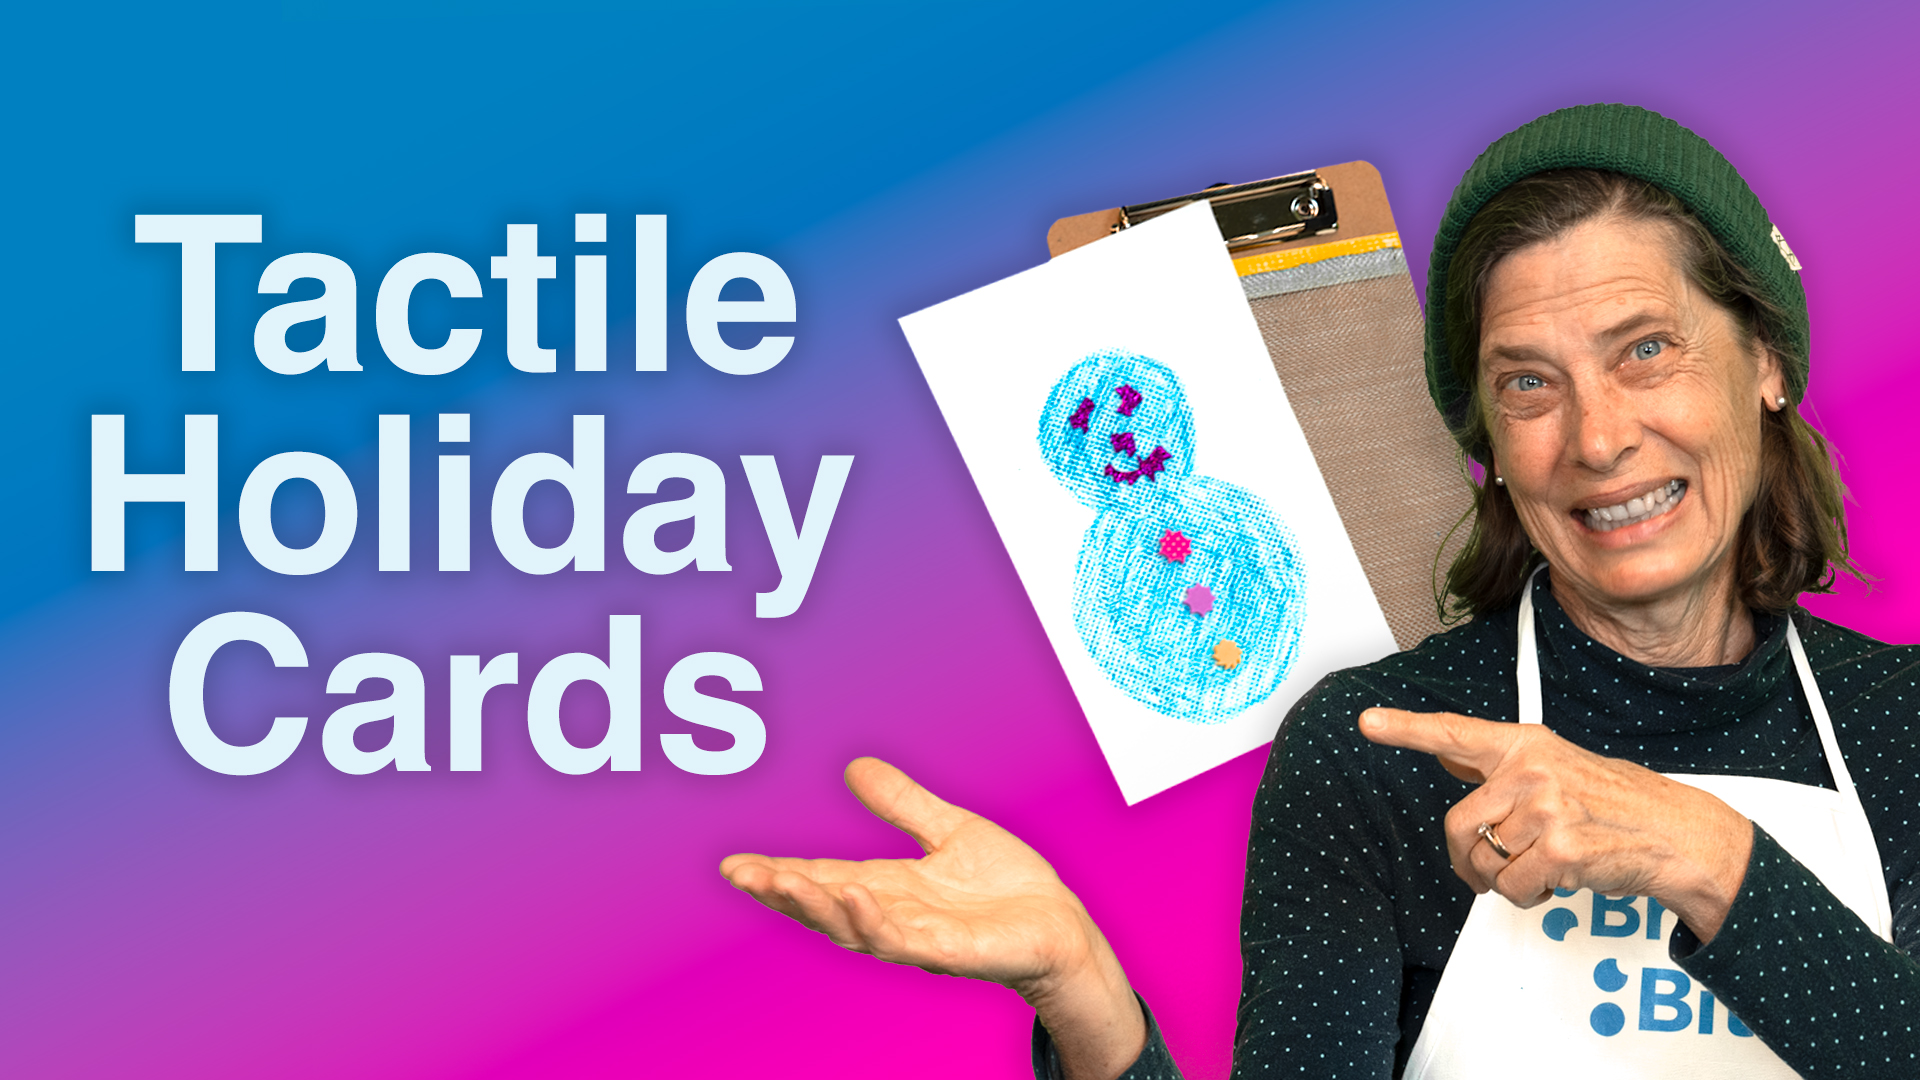 Video thumbnail shows Daphne smiling and pointing at text that read 'Tactile Holiday Cards'. A card with a snowperson and a screen board are also shown.